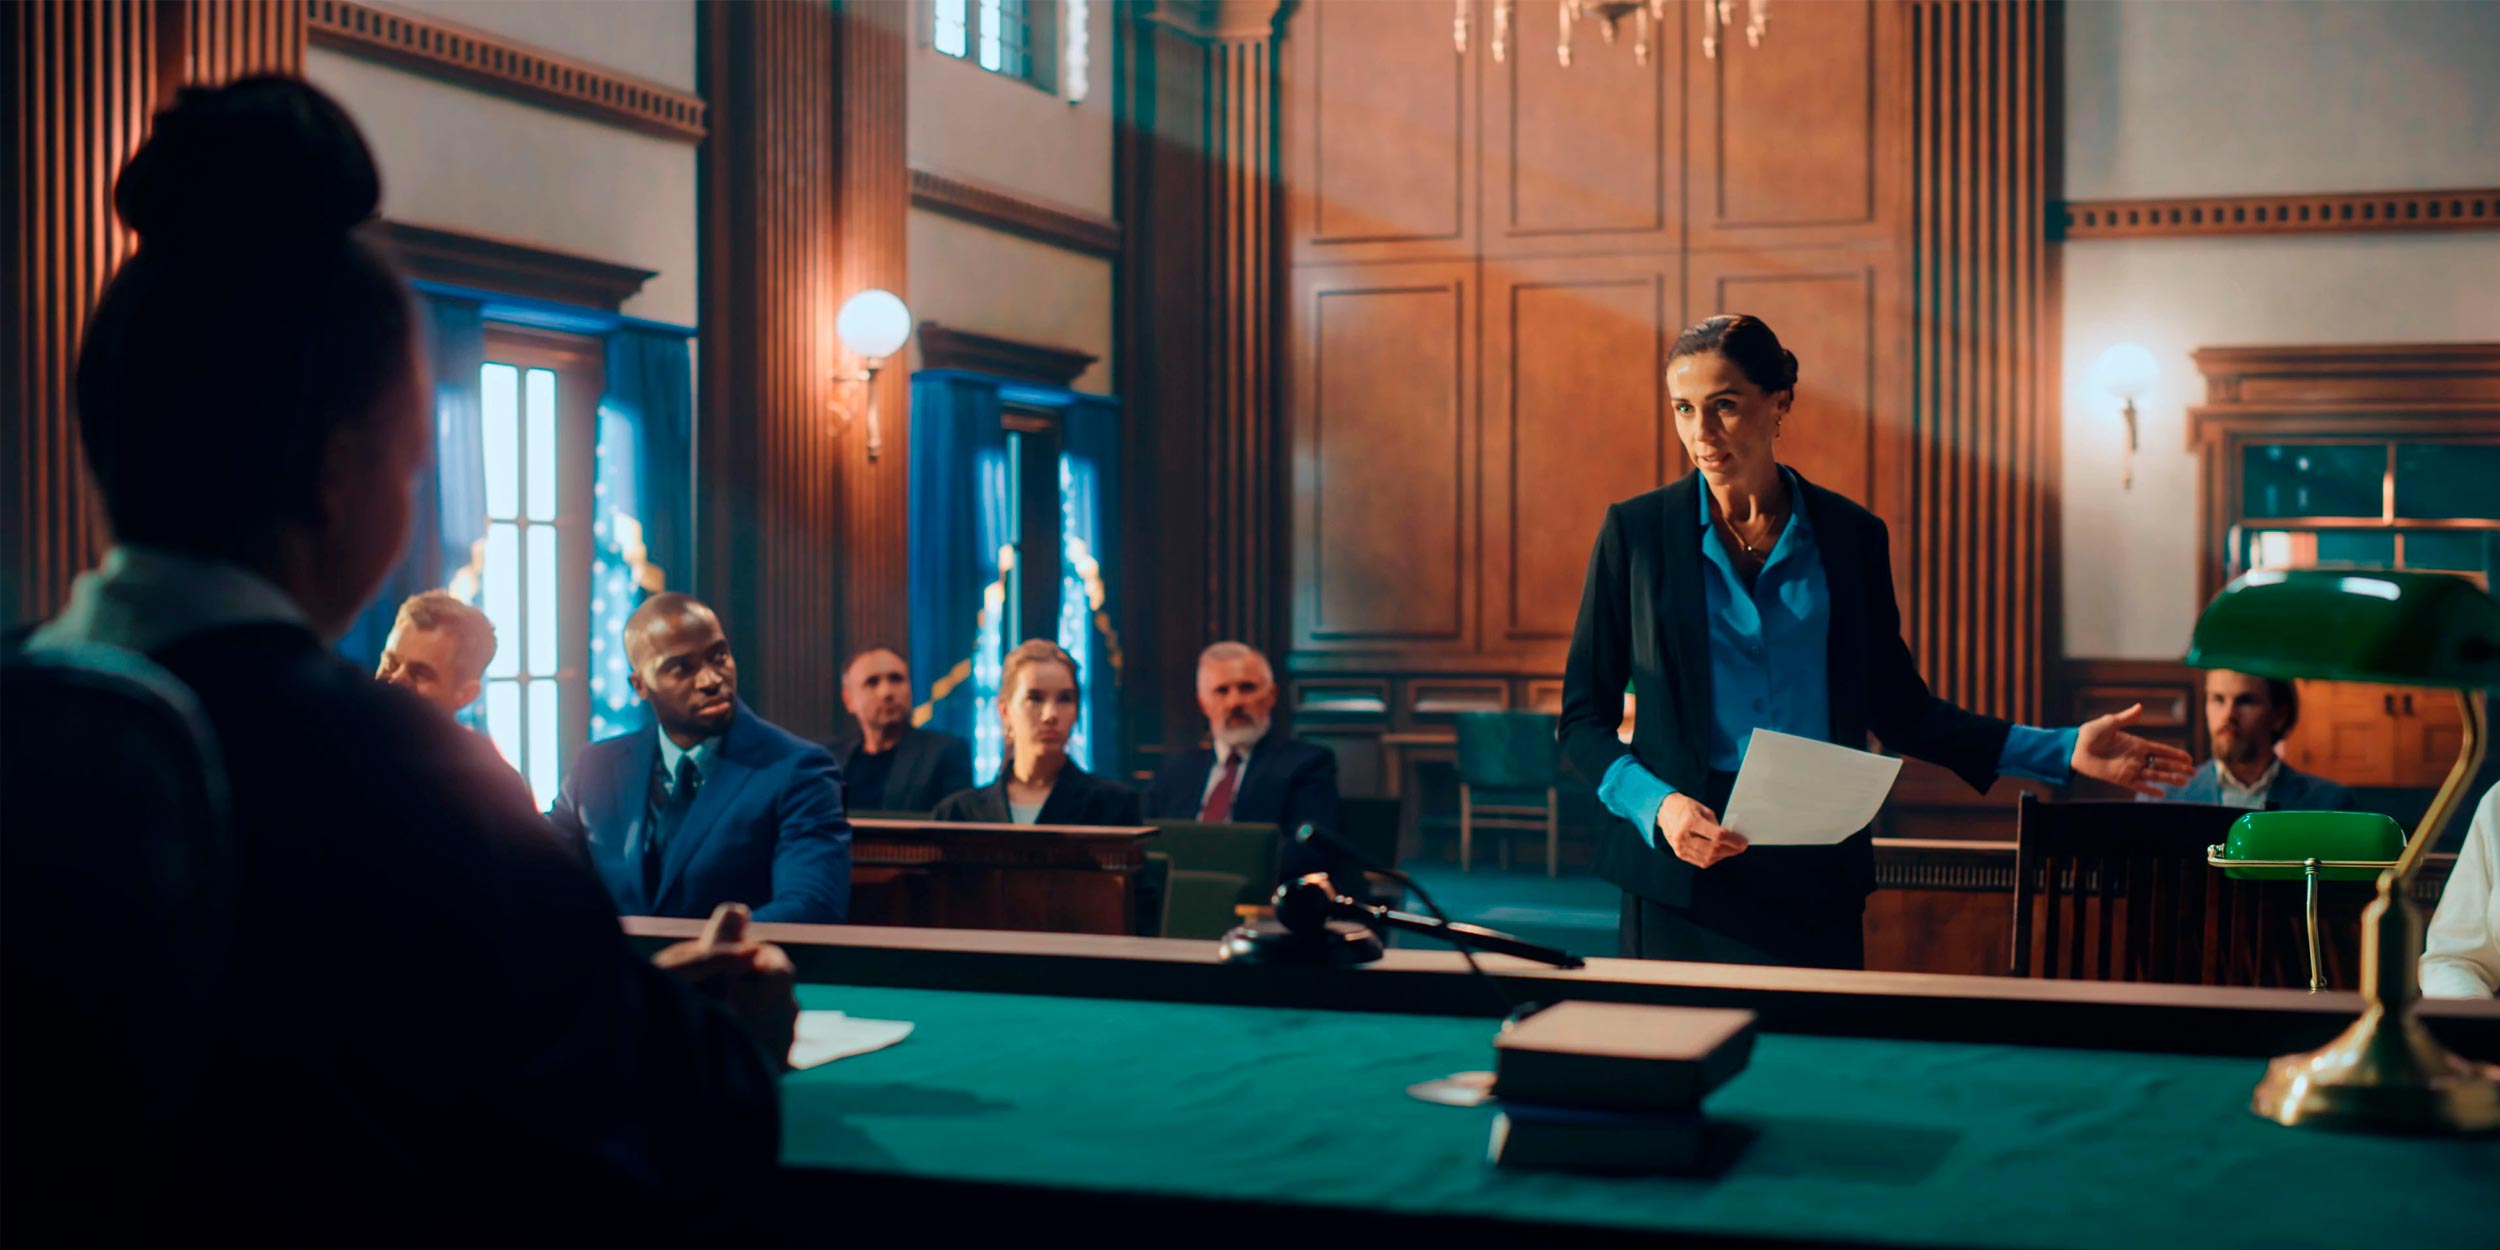 Lawyer litigating in court room